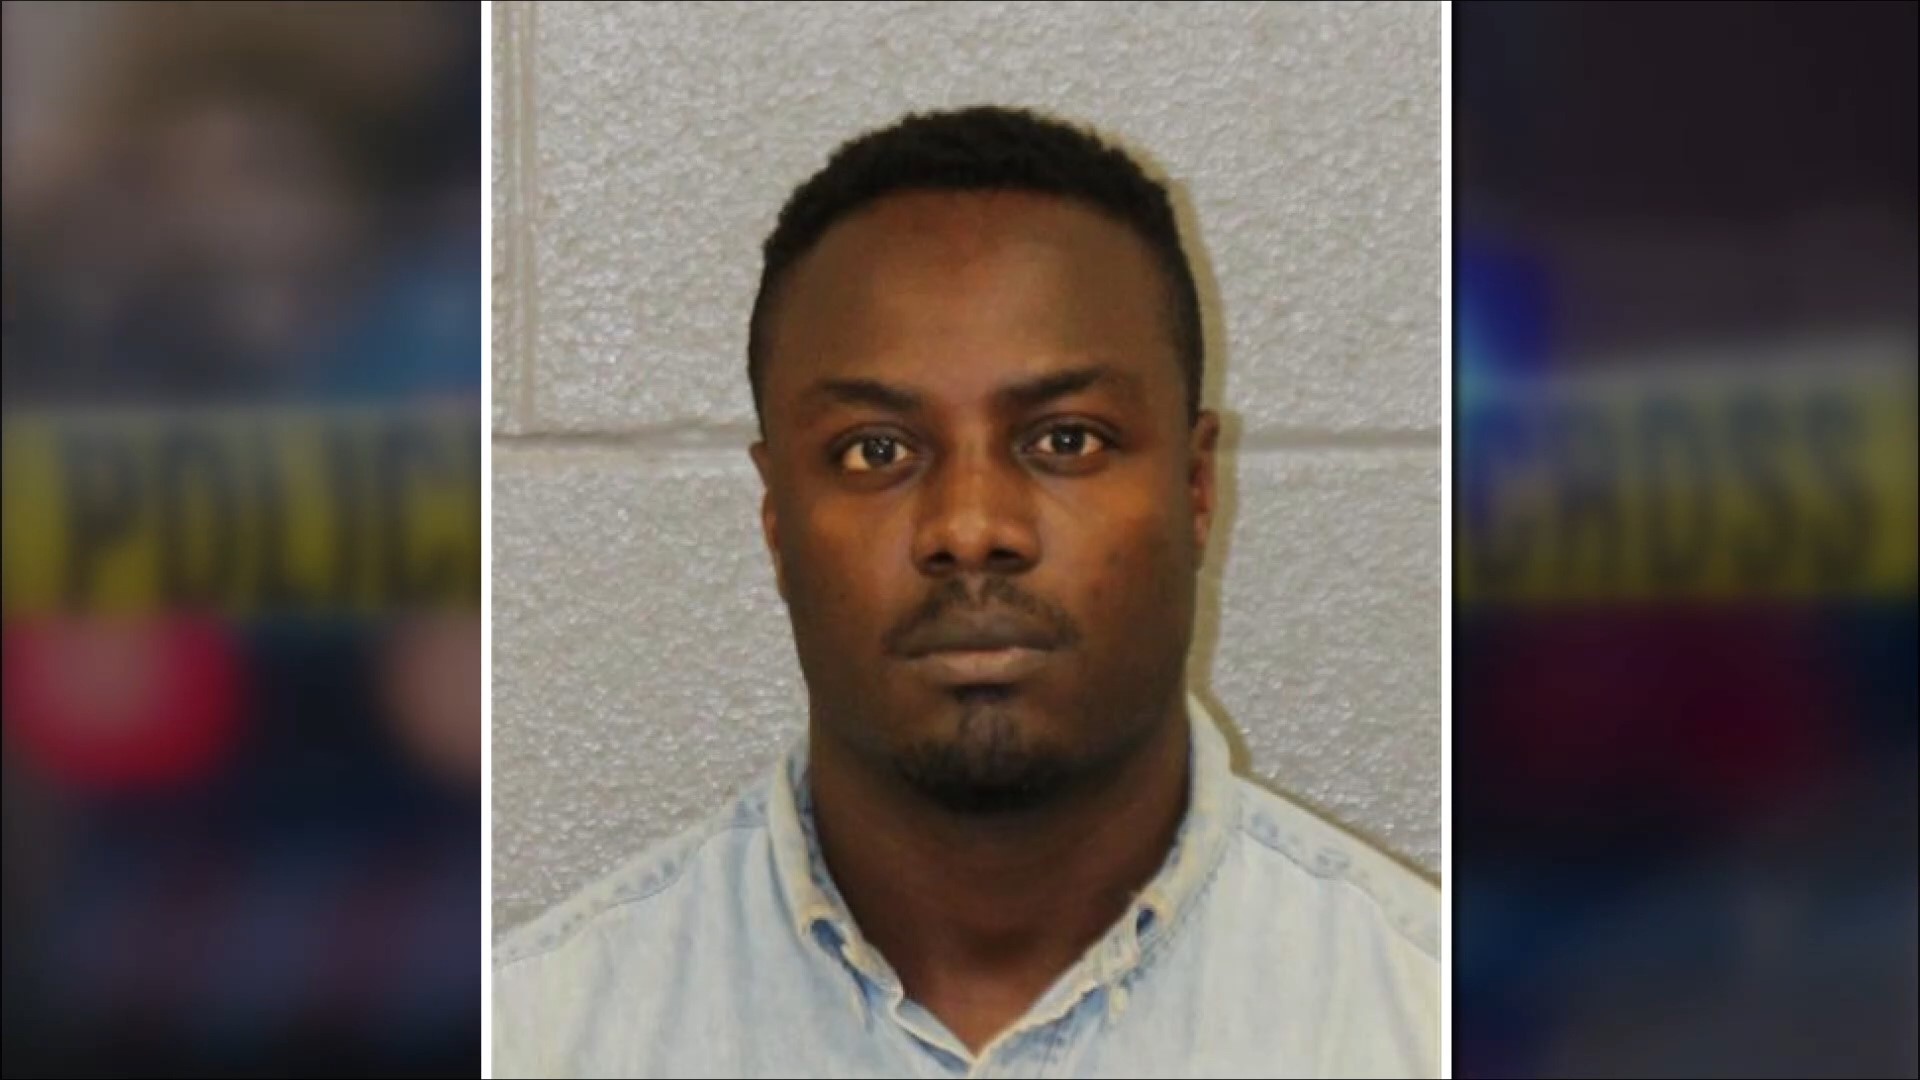 A paramedic employed by a Fort Mill emergency agency is accused of sexually assaulting a teen girl while she was riding in an ambulance in Charlotte, police say.